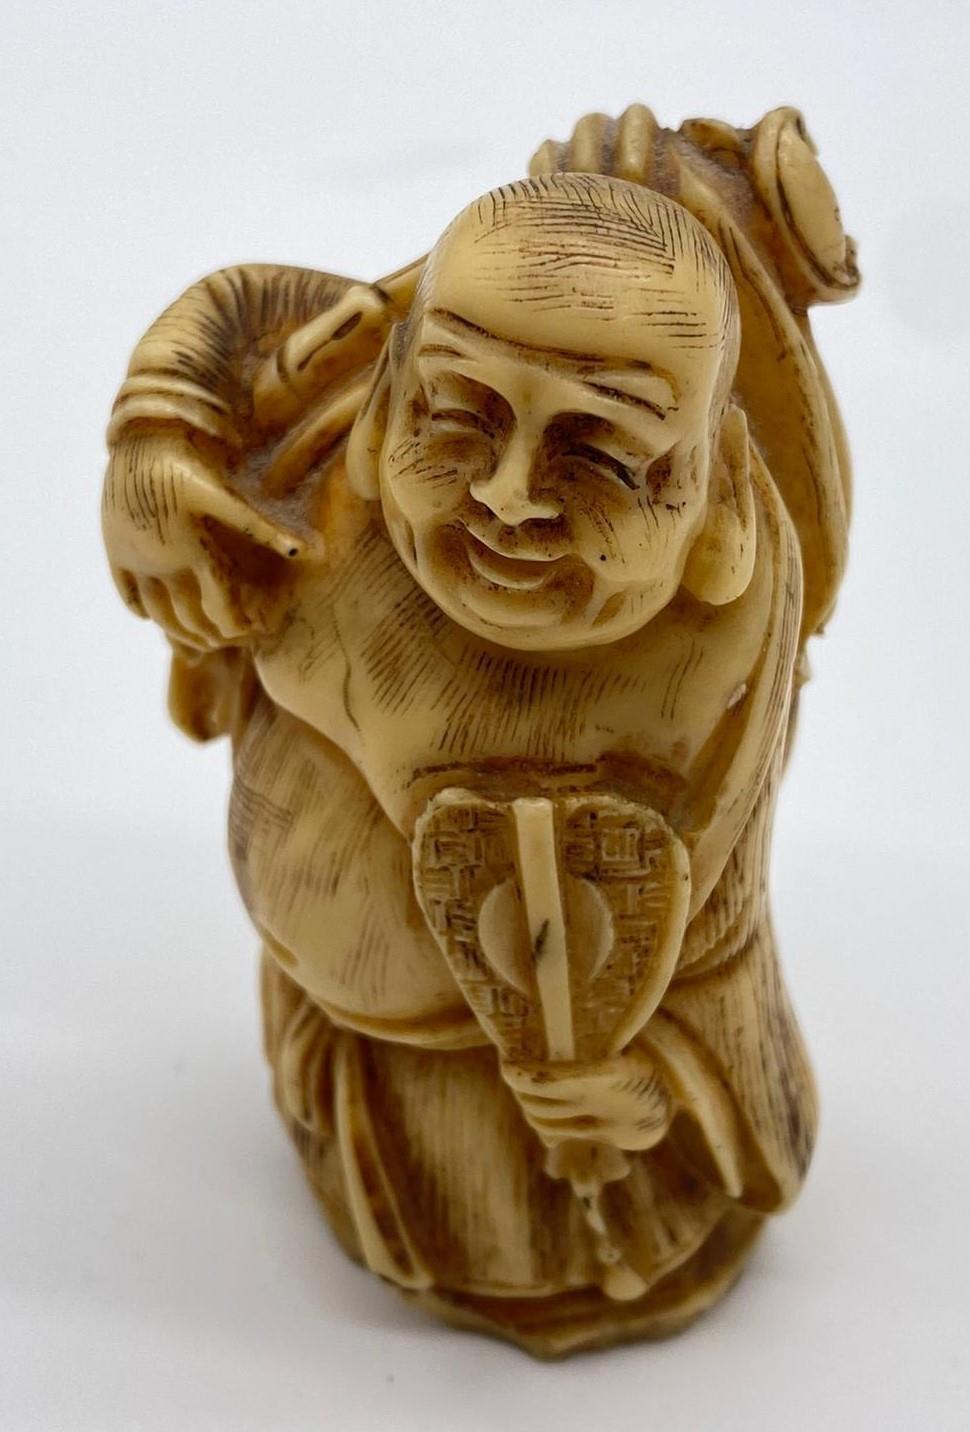 Ivory CHINESE Budha hand carved with fan. 8cm tall. circa 1880. - Image 2 of 4